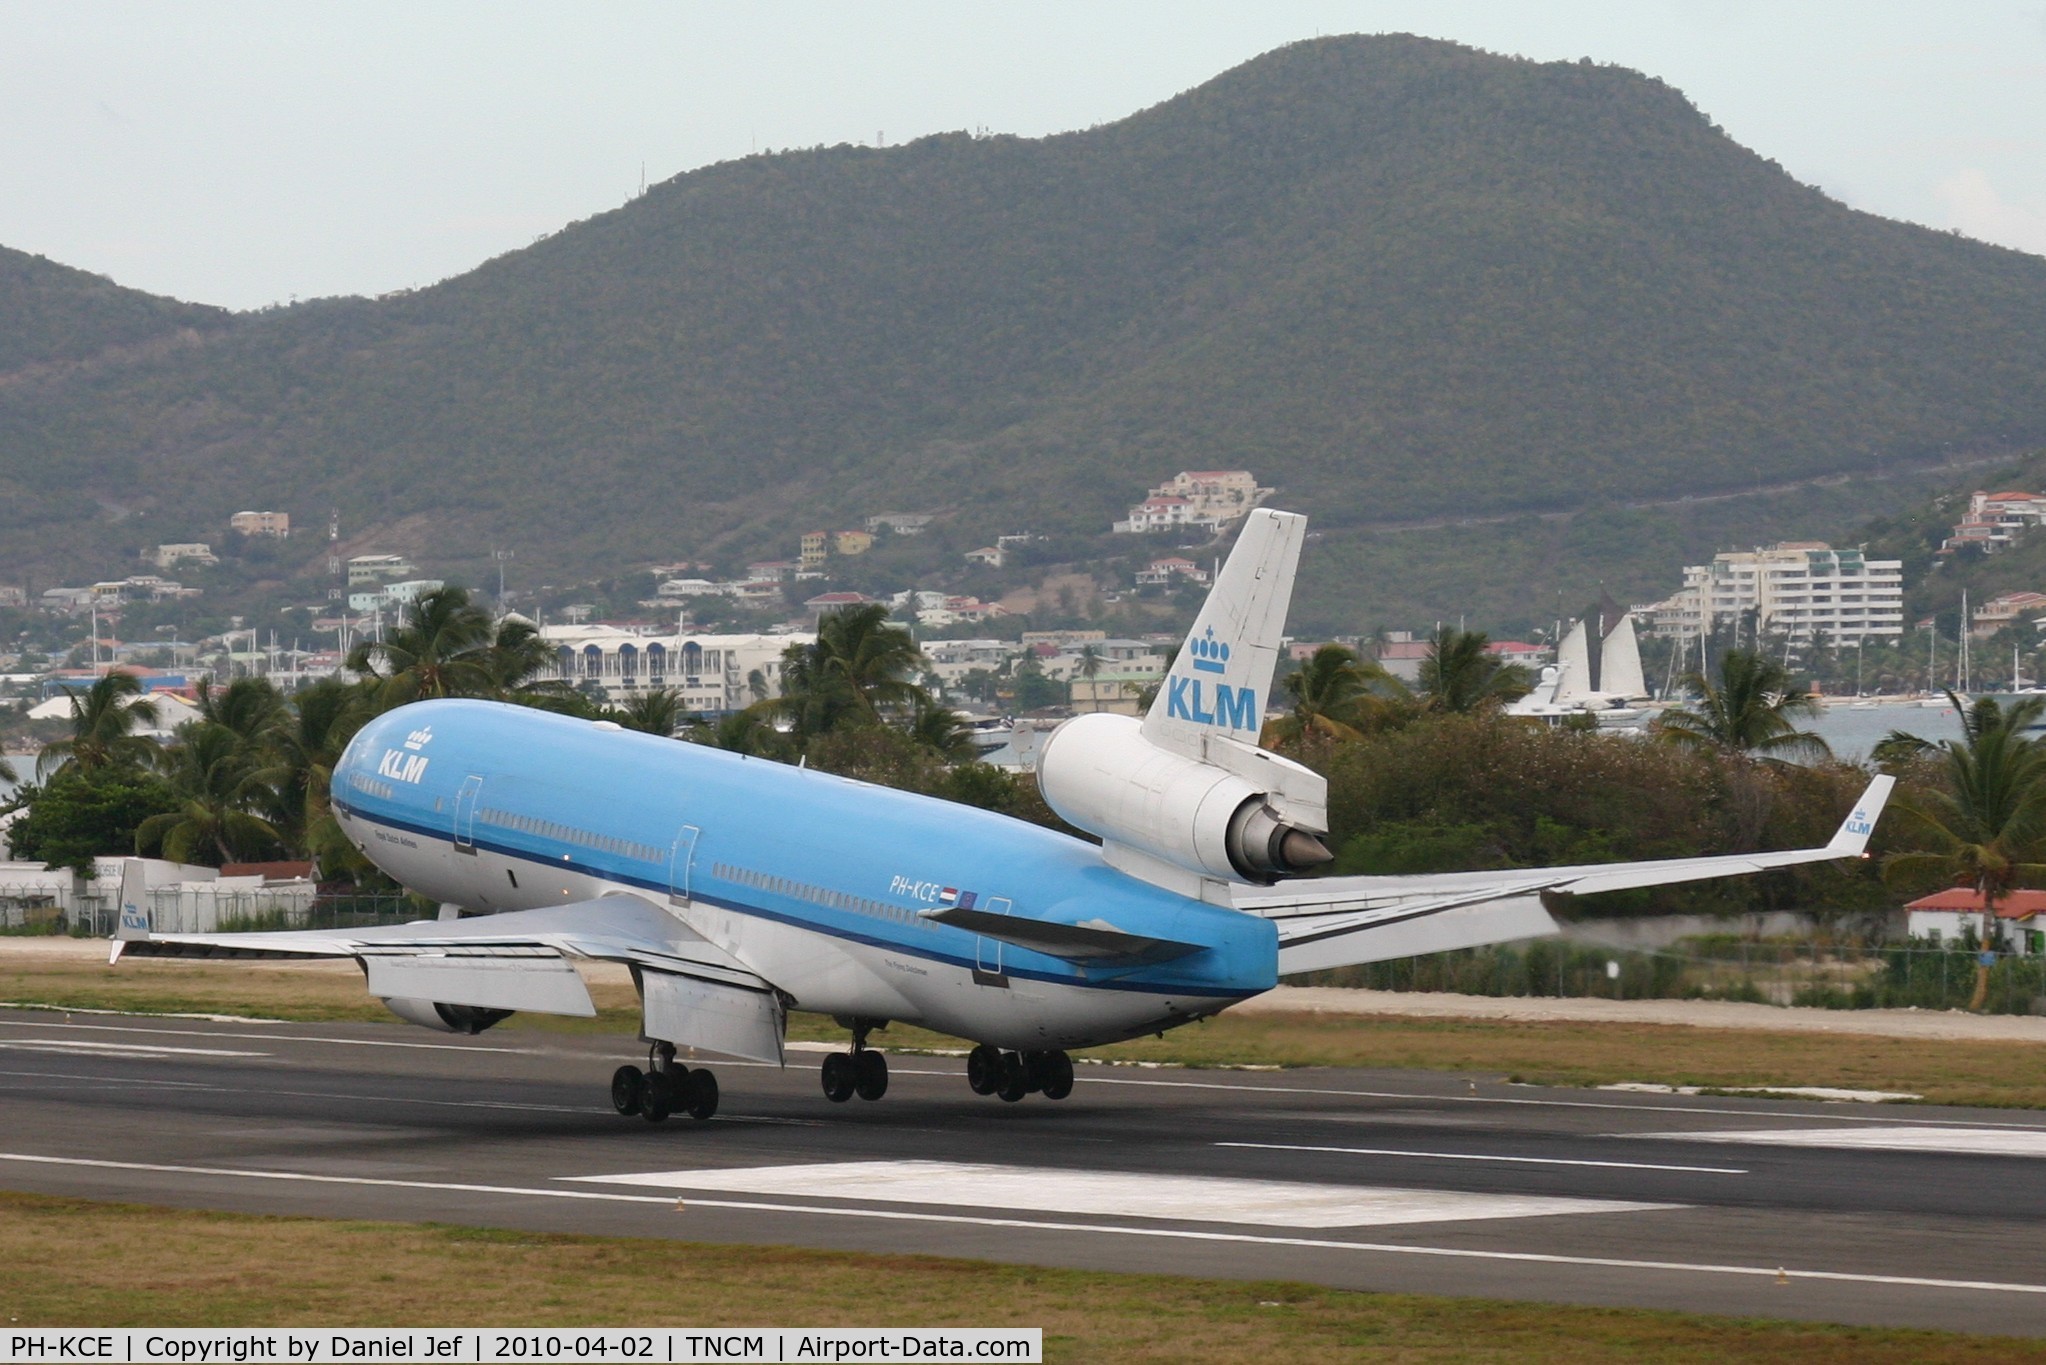 PH-KCE, 1994 McDonnell Douglas MD-11 C/N 48559, KLM PH-KCE touching down at TNCM runway 10